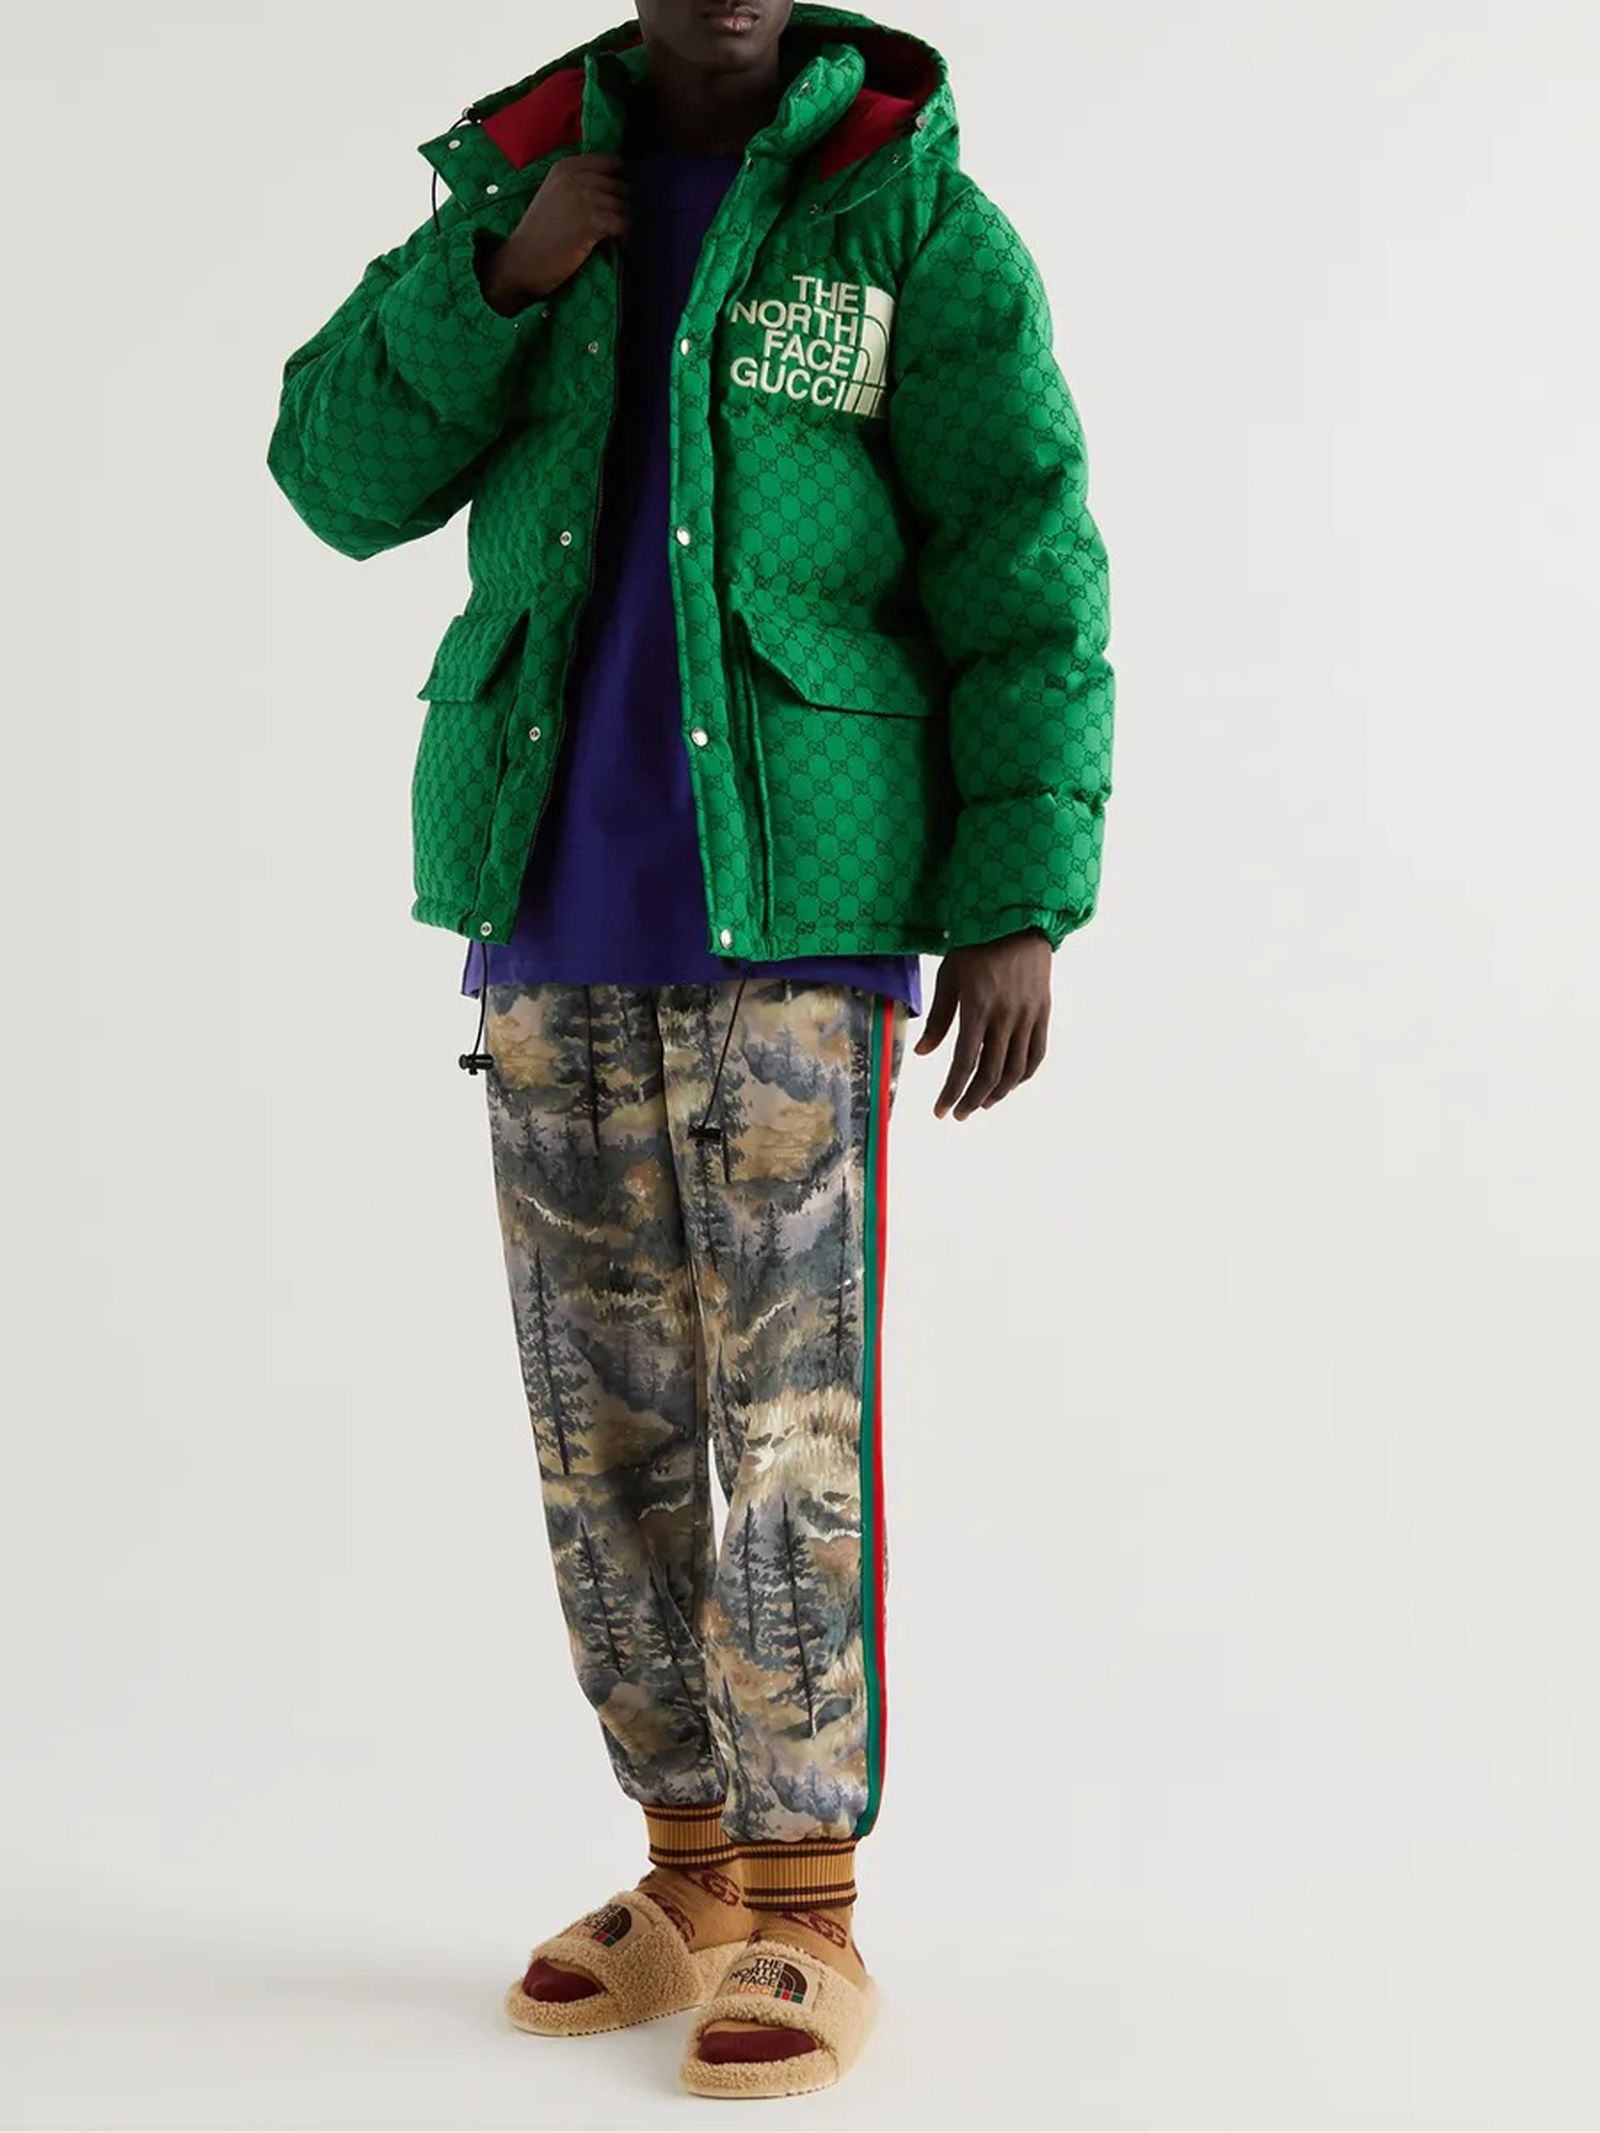 gucci-the-north-face-second-collection-fw21-5.jpg